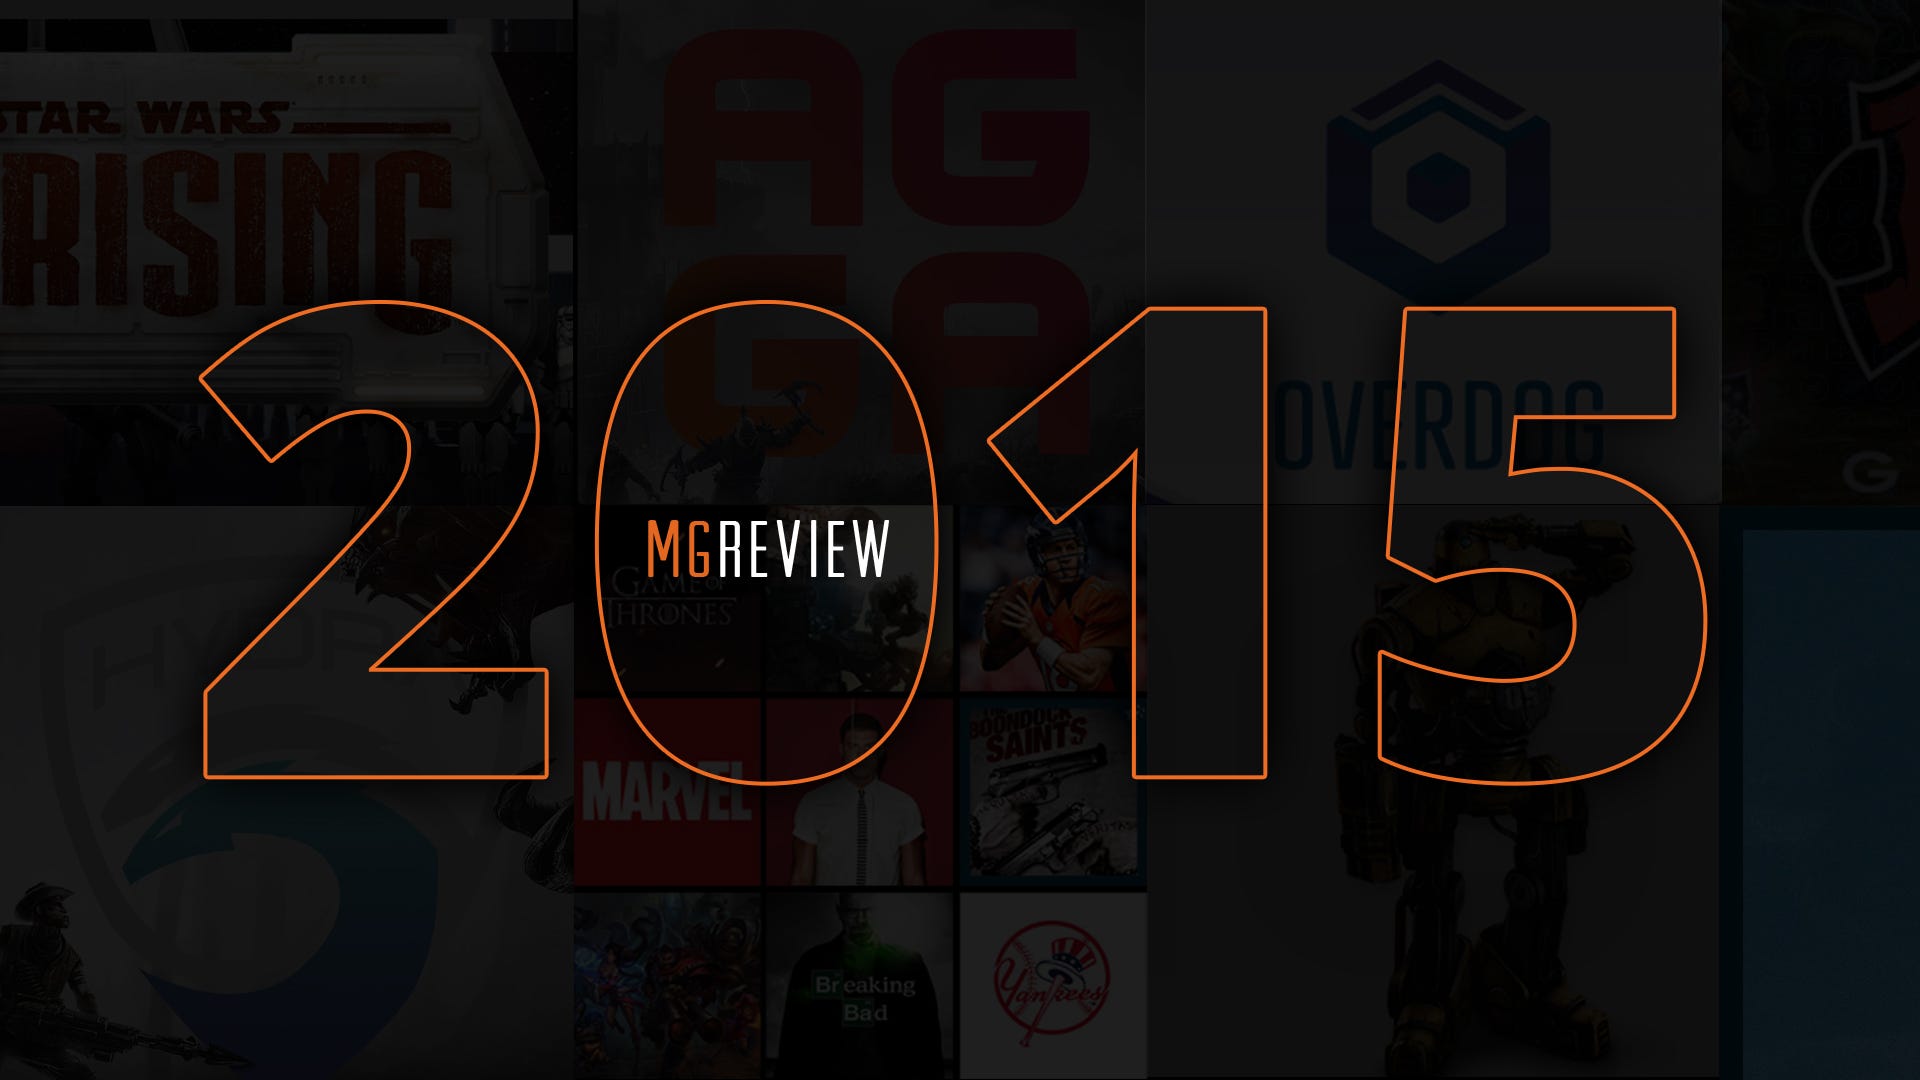 review-2015